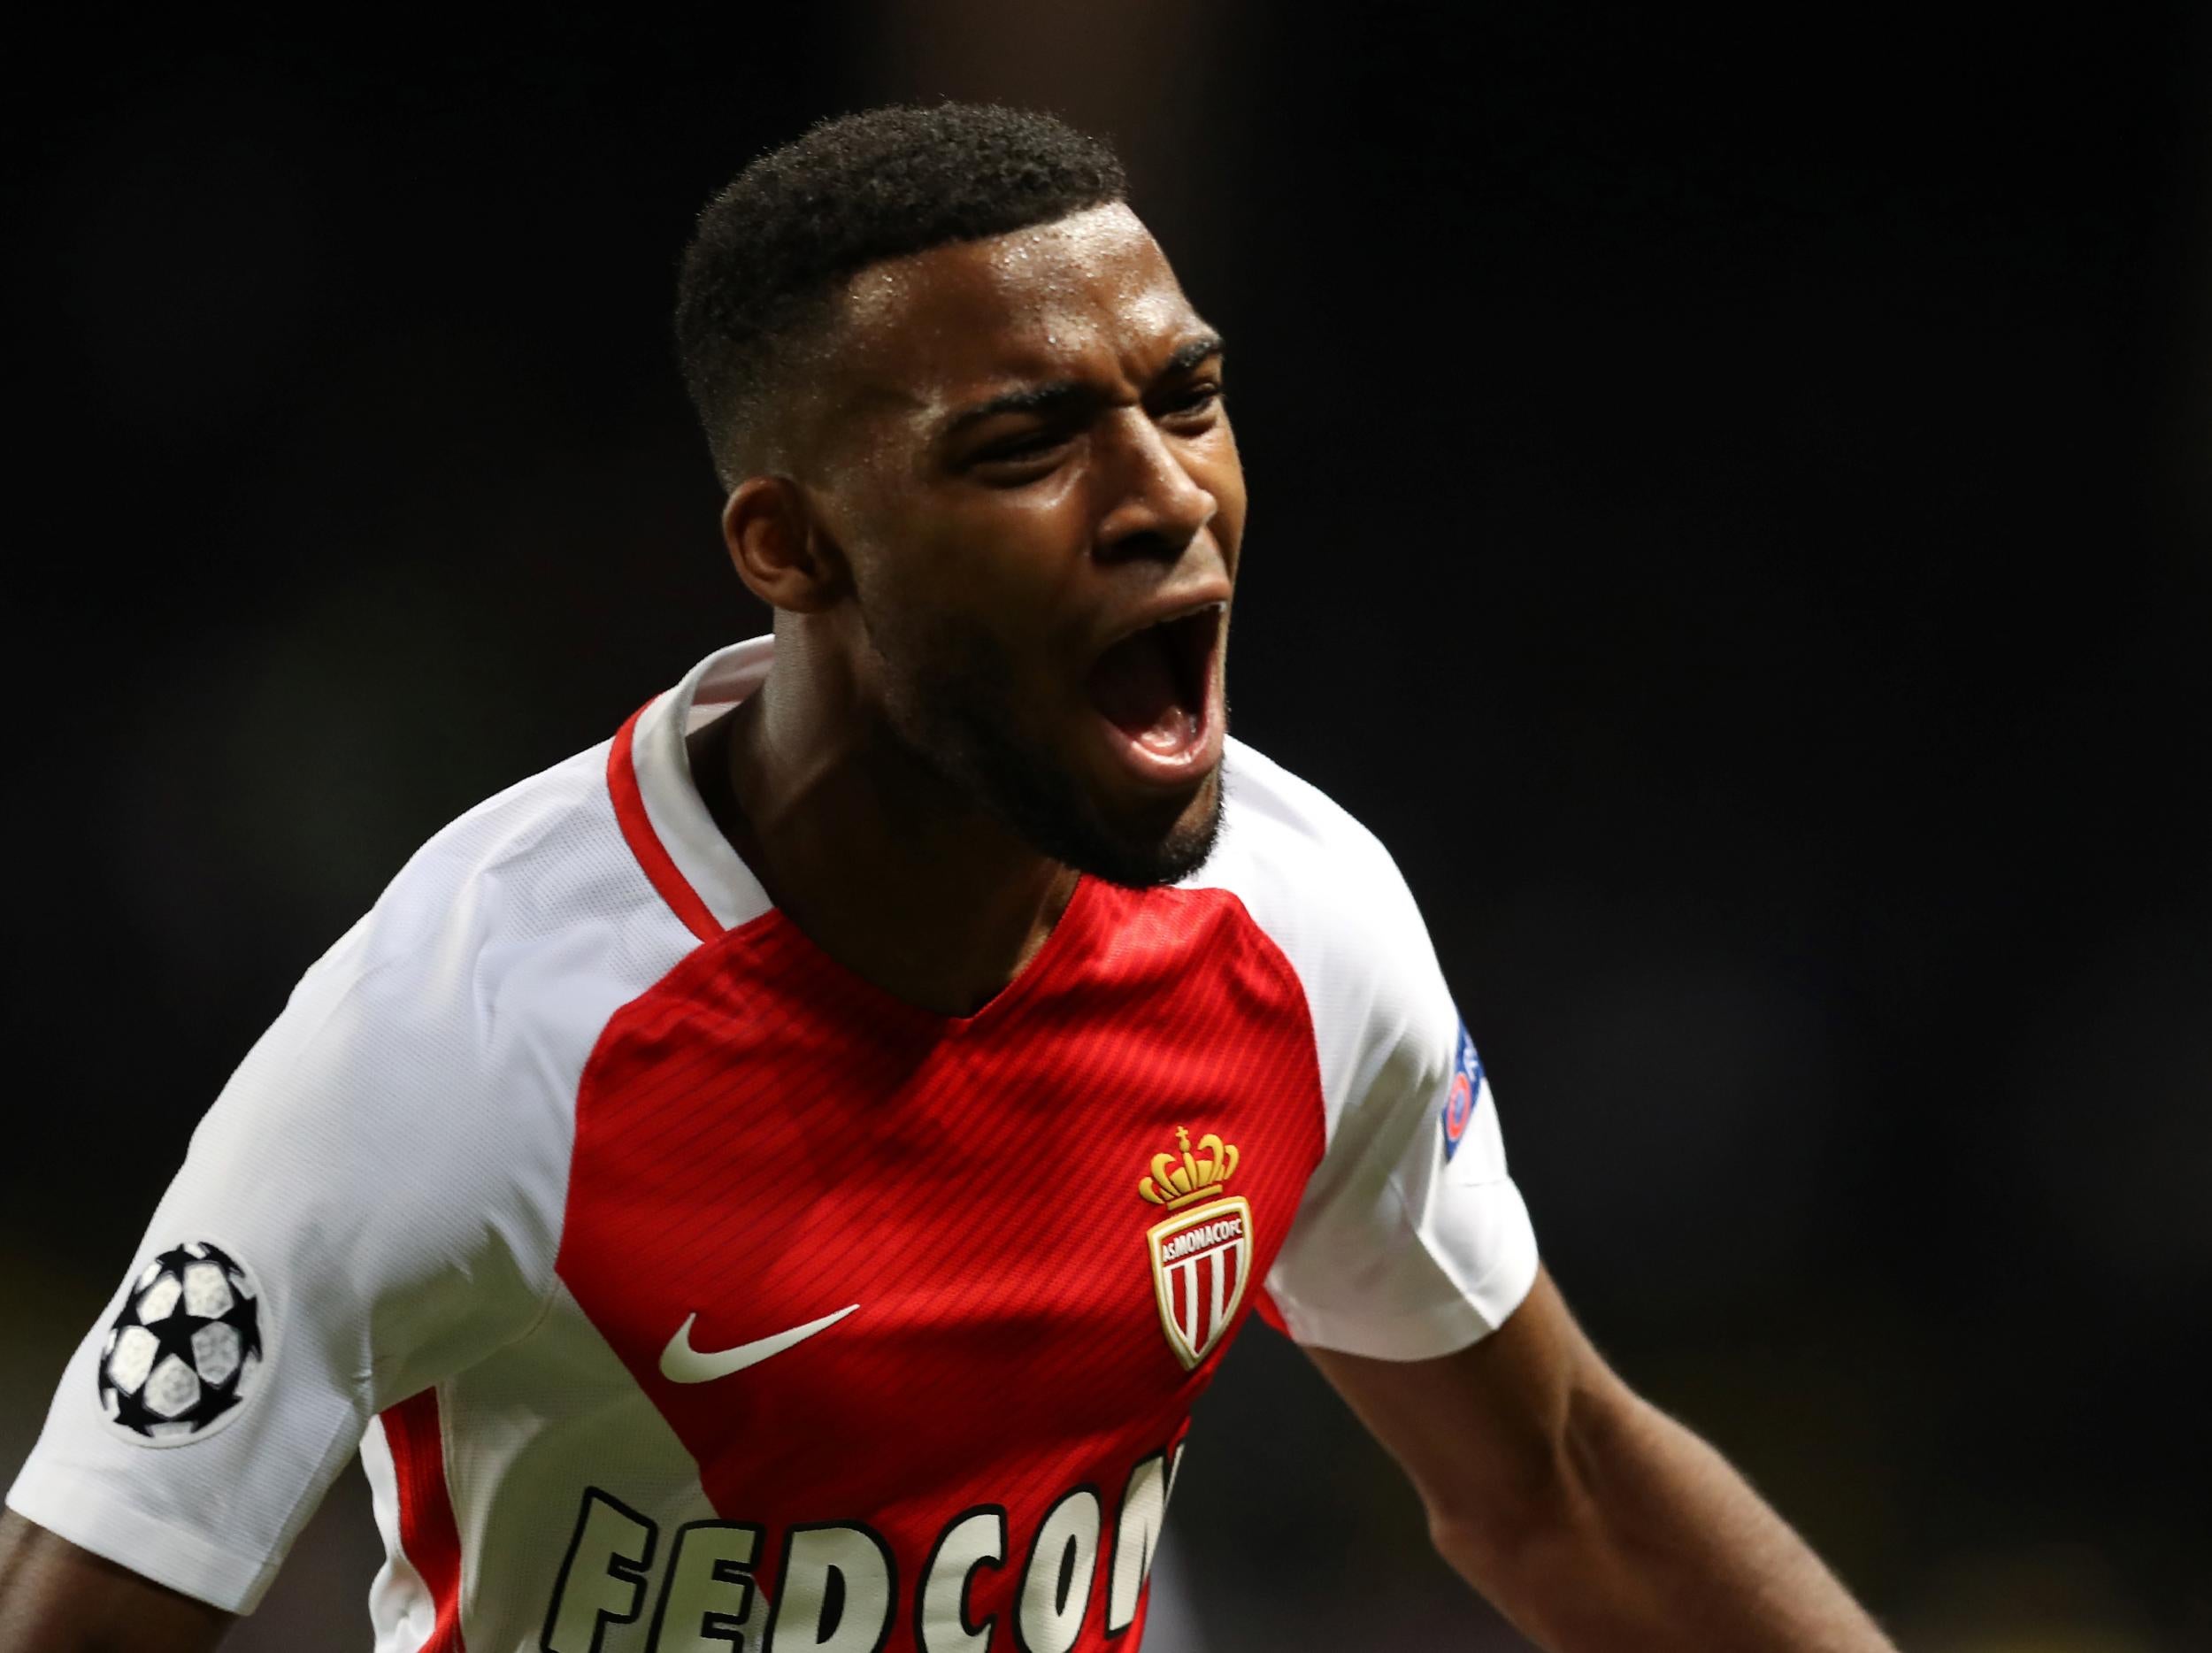 Arsenal will likely make another attempt to sign Lemar